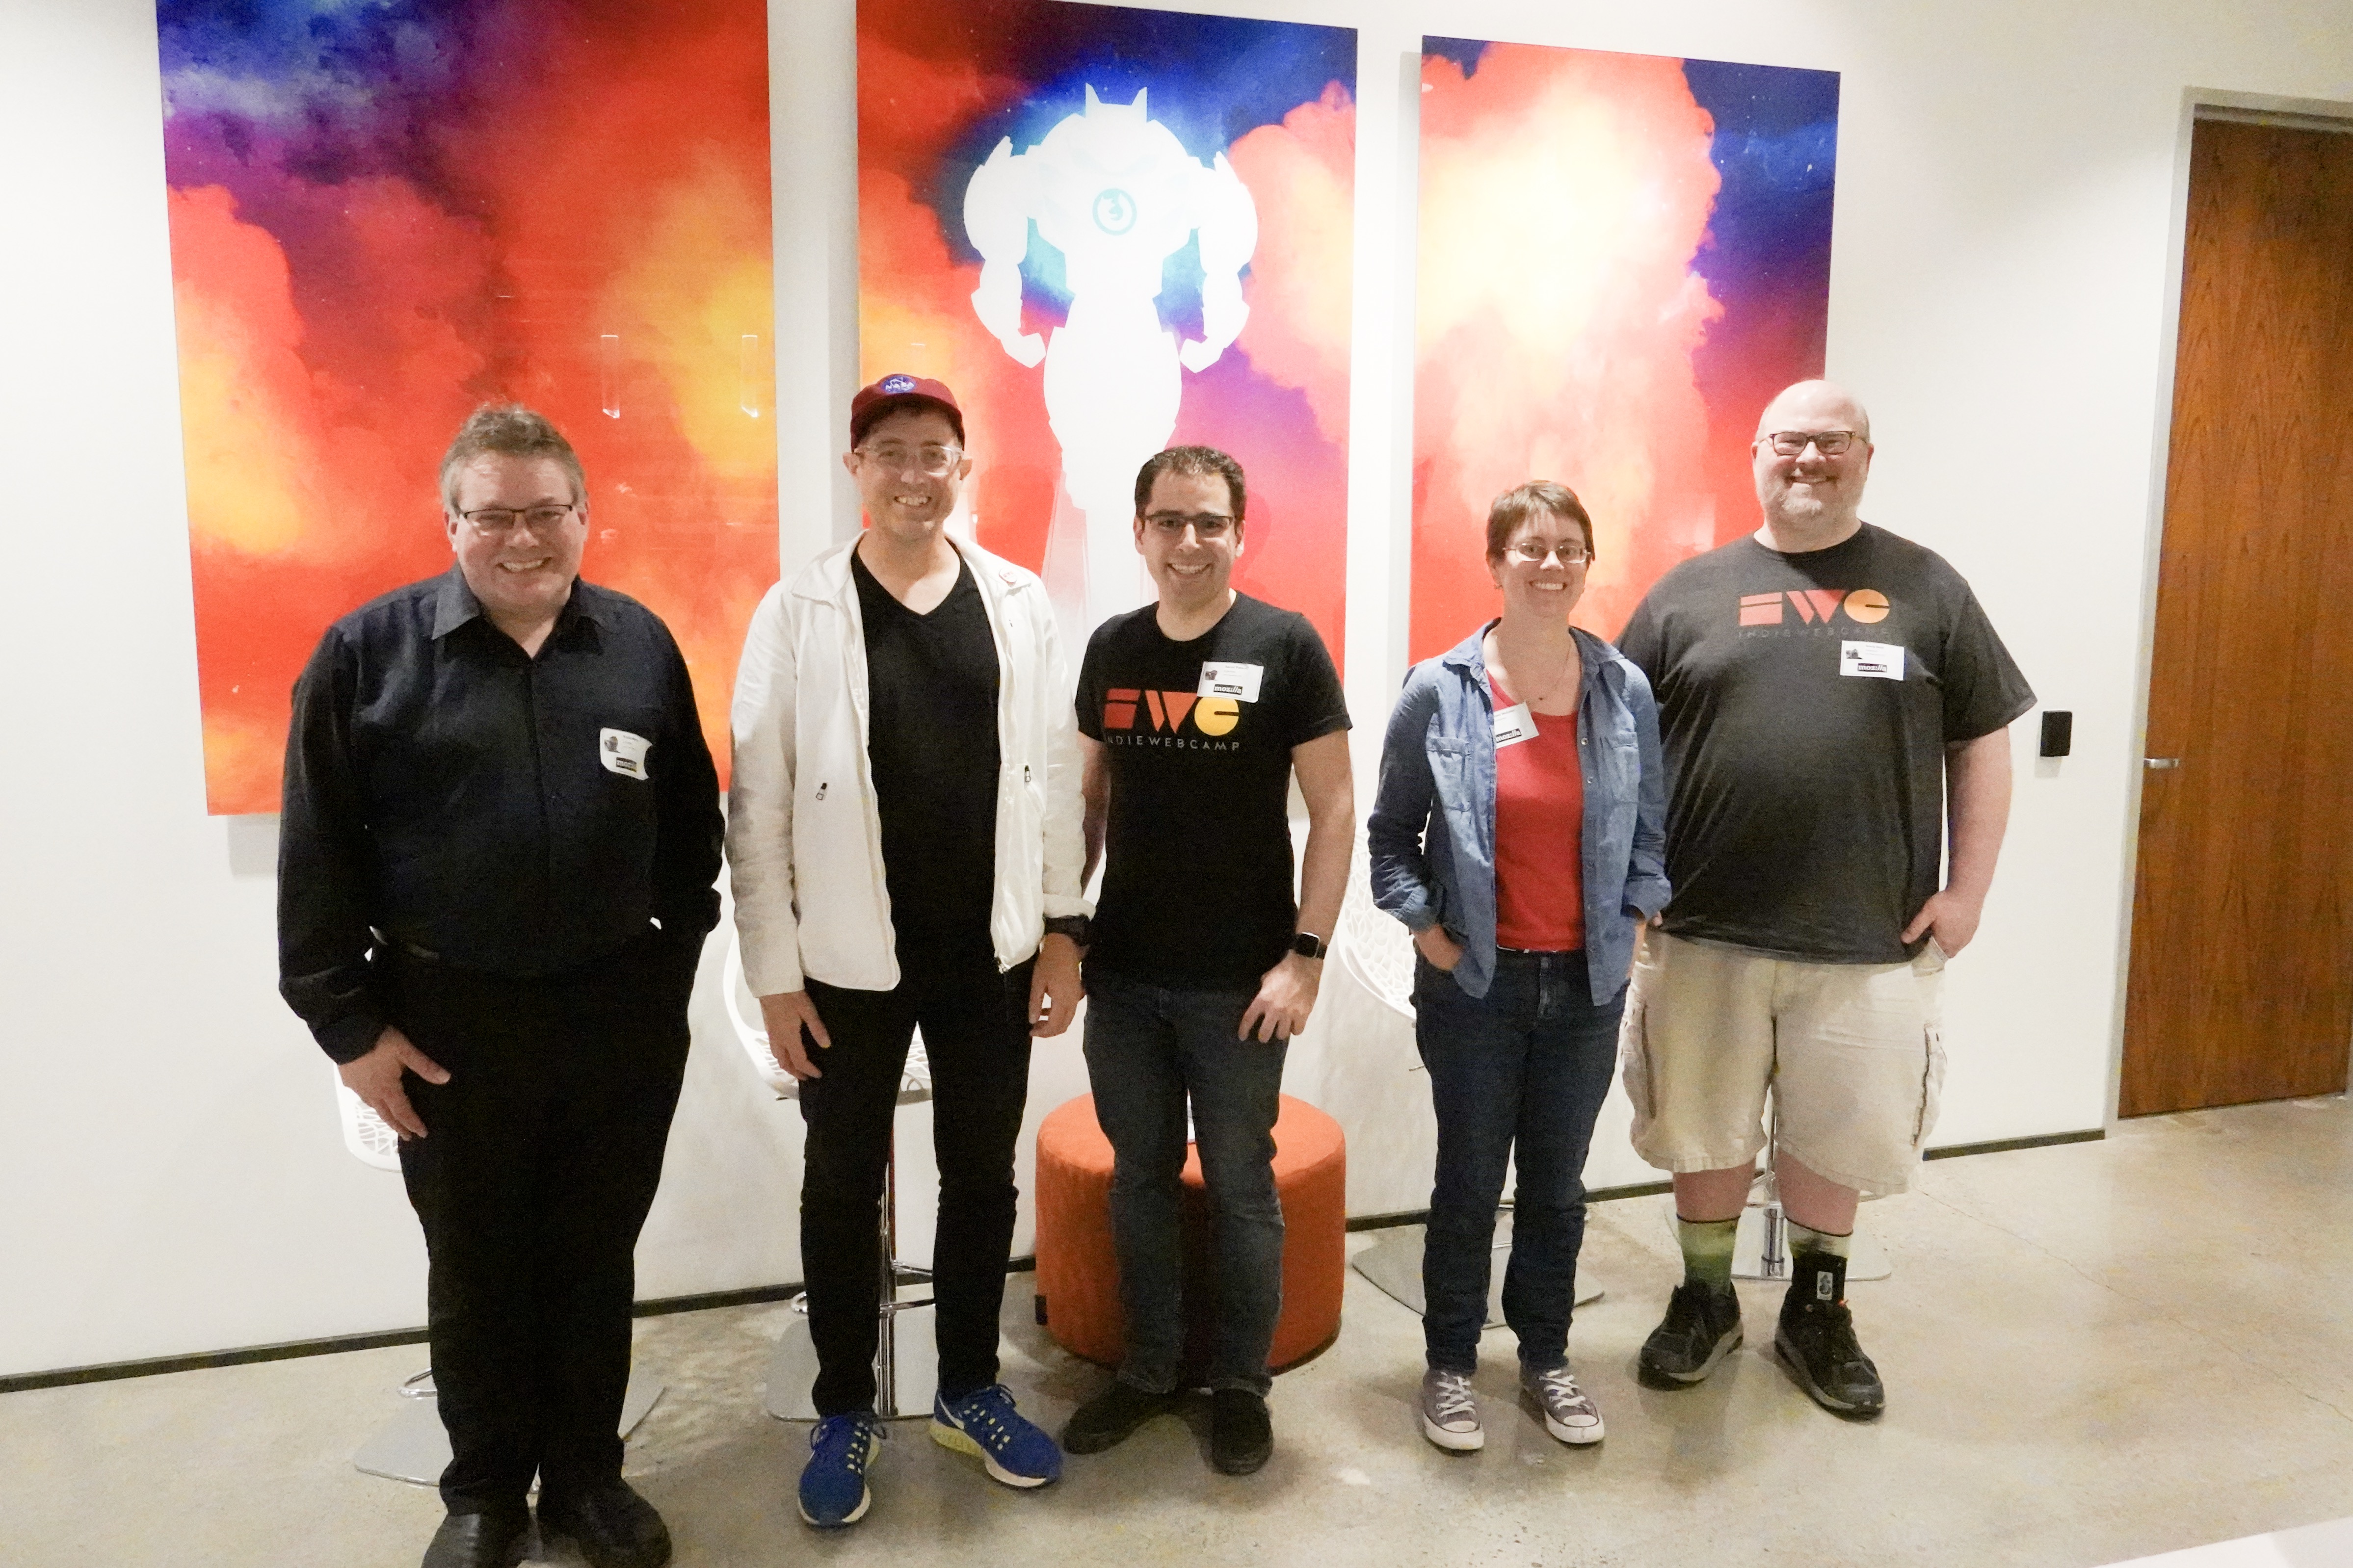 Kevin Marks, Tantek, Aaron, Claire, and Doug Beal at Mozilla Portland for the Homebrew Website Club PDX meetup!